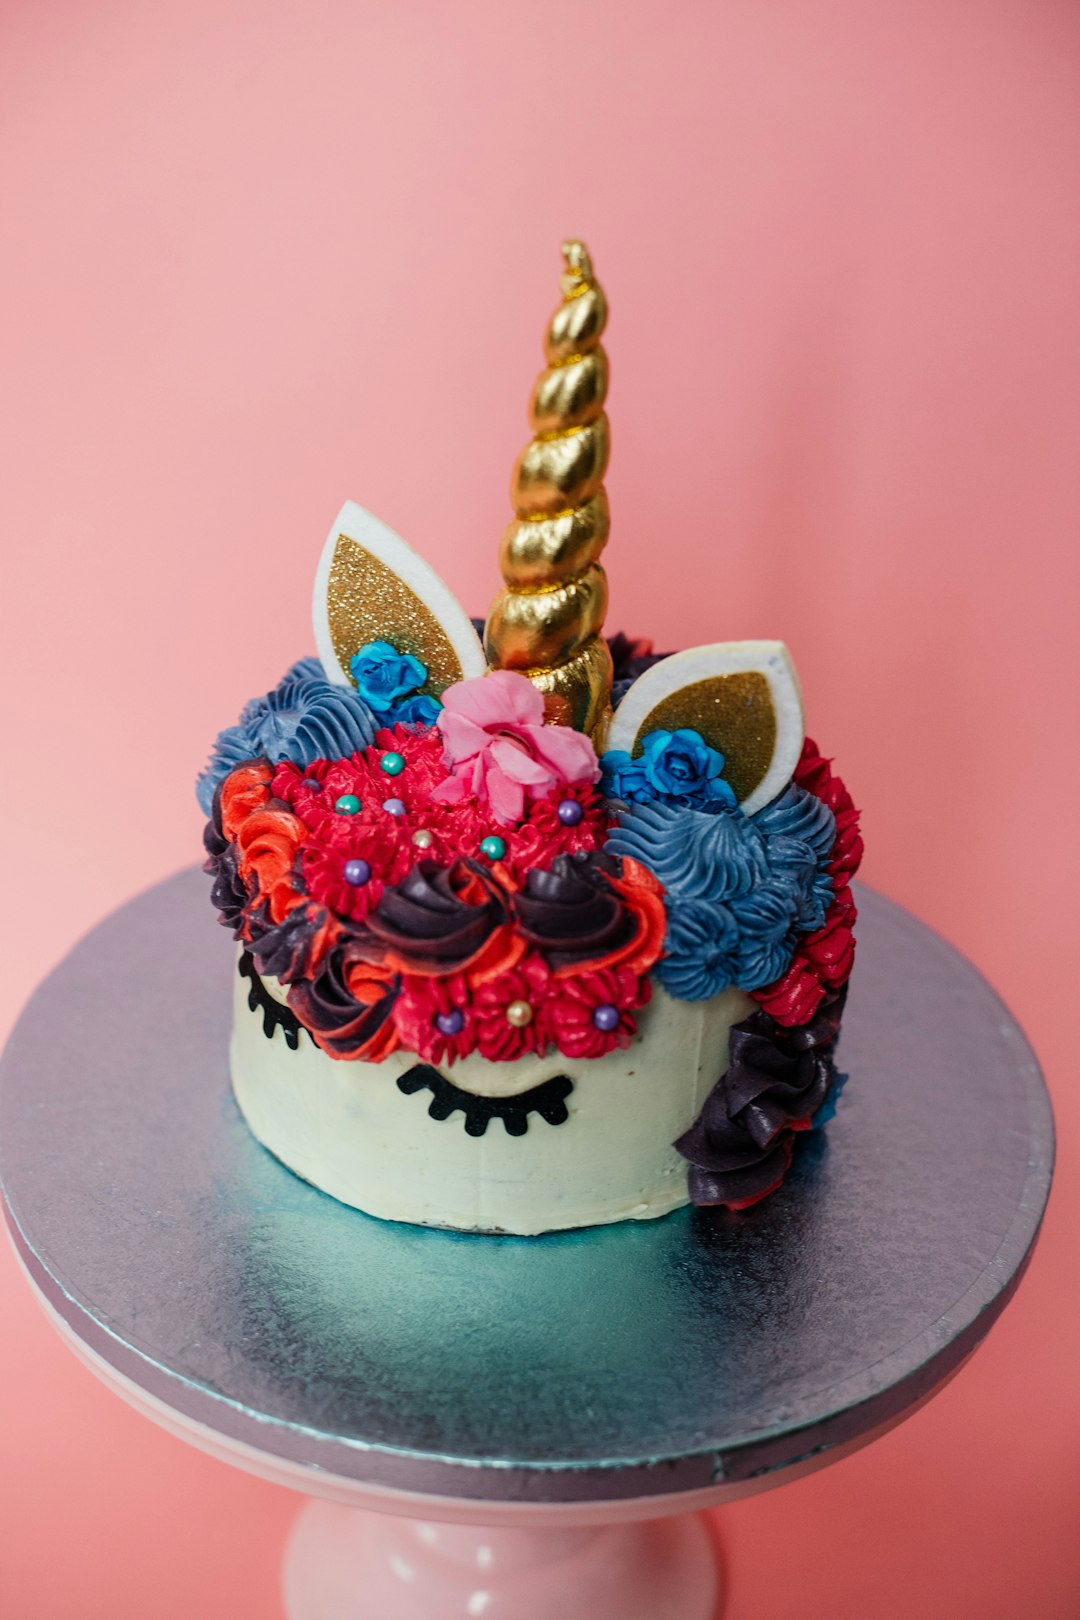 The Impact of Social Media on Birthday Cake Trends